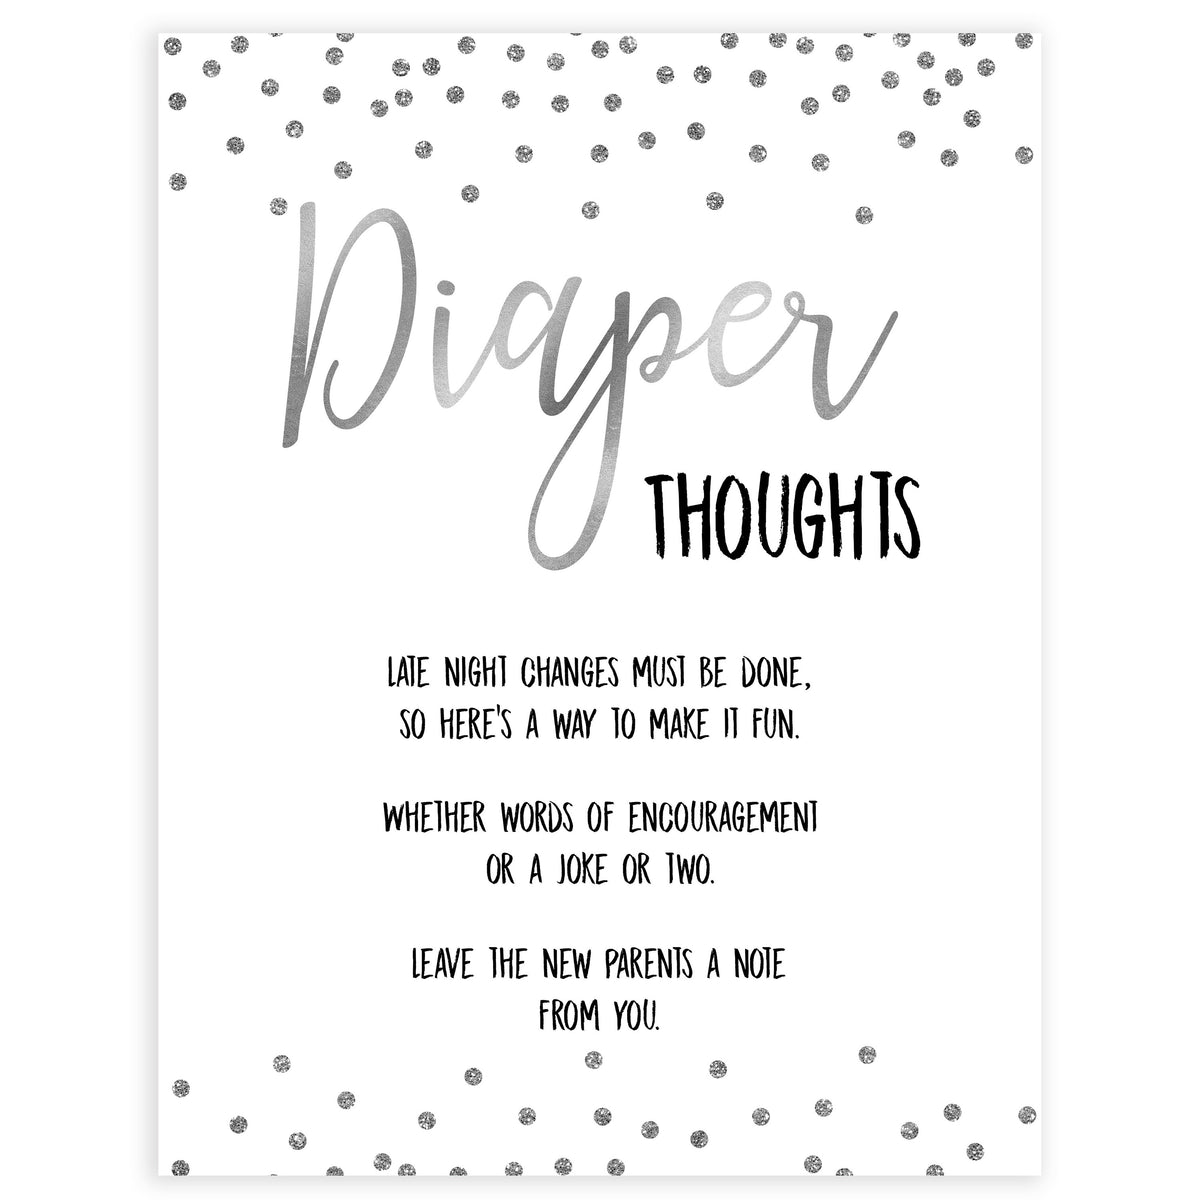 diaper thoughts game, late night diapers game, Printable baby shower games, baby silver glitter fun baby games, baby shower games, fun baby shower ideas, top baby shower ideas, silver glitter shower baby shower, friends baby shower ideas